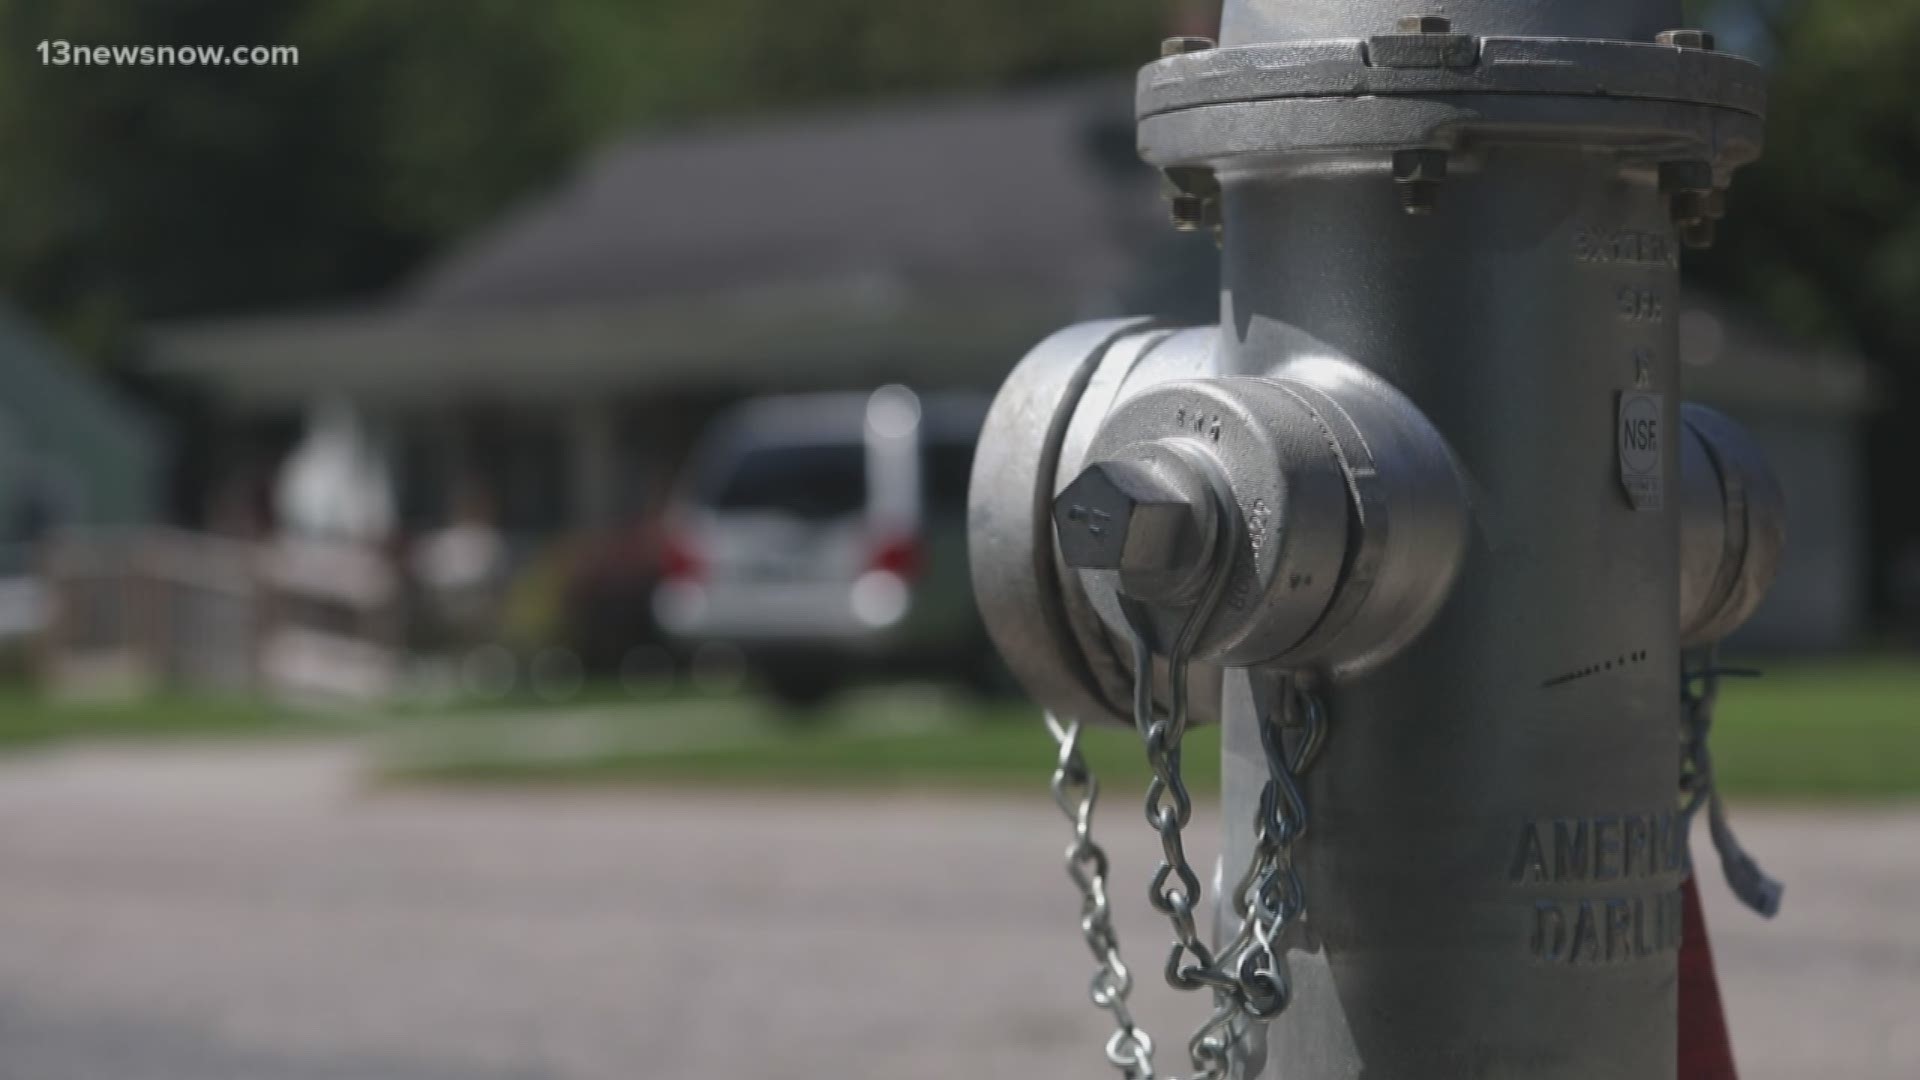 Even as hydrants continue to break, Portsmouth crews have cut the number of broken hydrants from 25 to 13. With 13 broken hydrants, Portsmouth would still have the highest number as of 13News Now's last check in May.